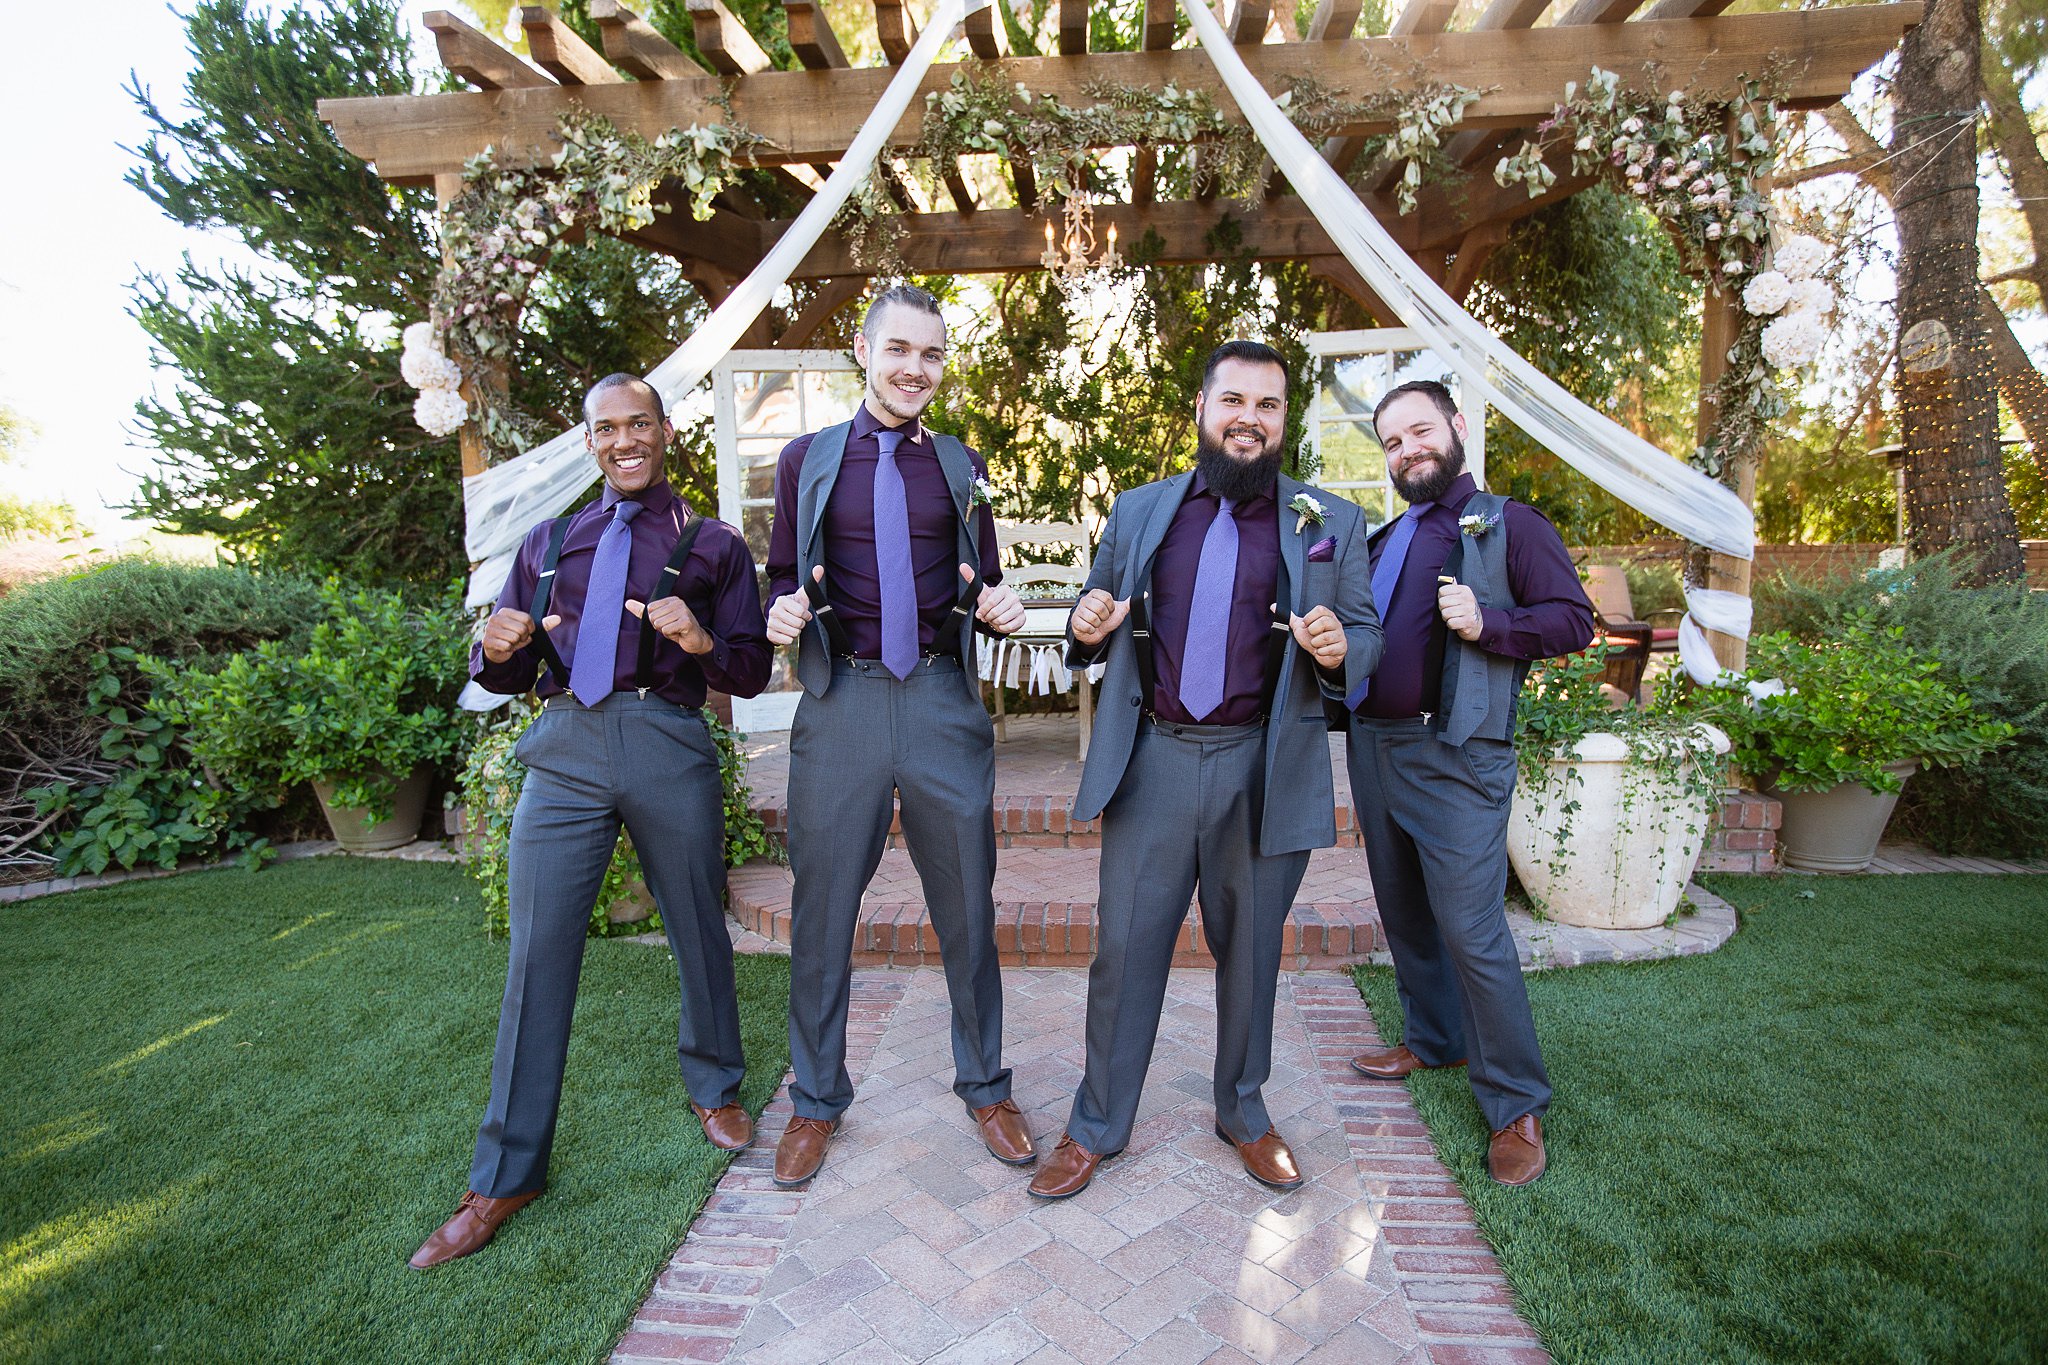 Groomsmen showing off the suspenders in their Purple and grey outfits at Schnepf Farms by Arizona wedding photographer PMA Photography.